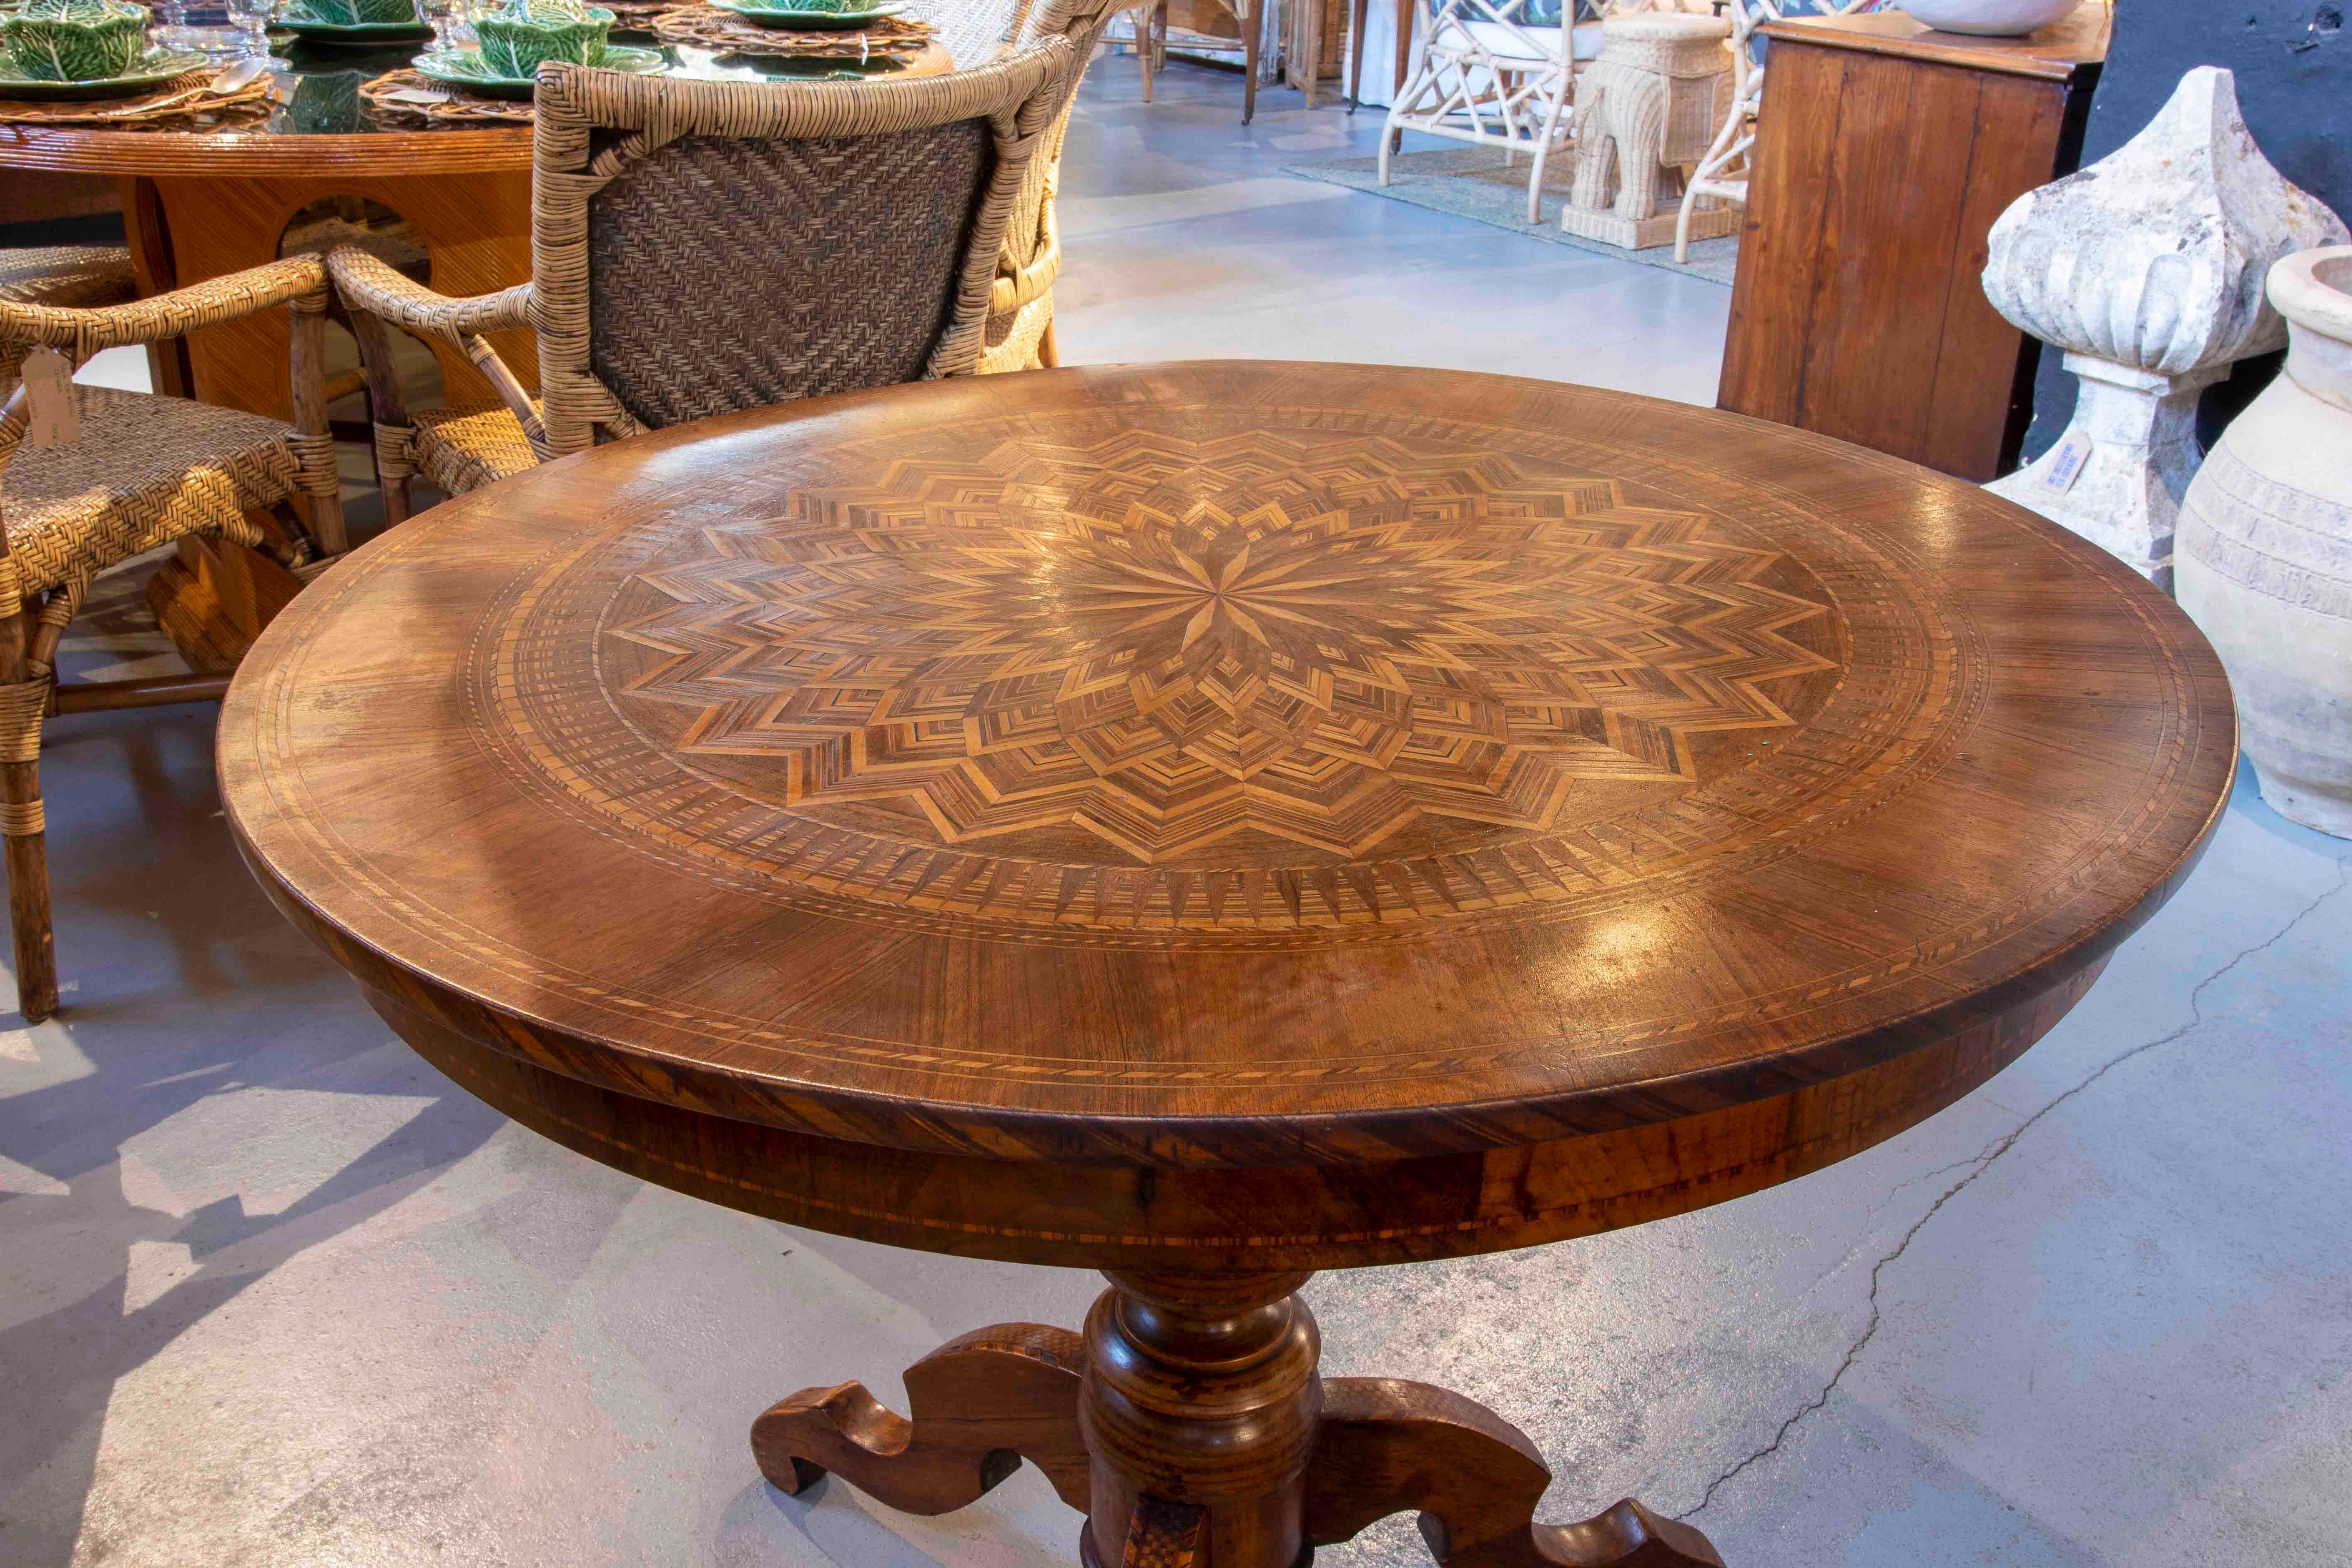 19th Century Round Wooden Table with Inlaid Table Top and Legs In Good Condition For Sale In Marbella, ES